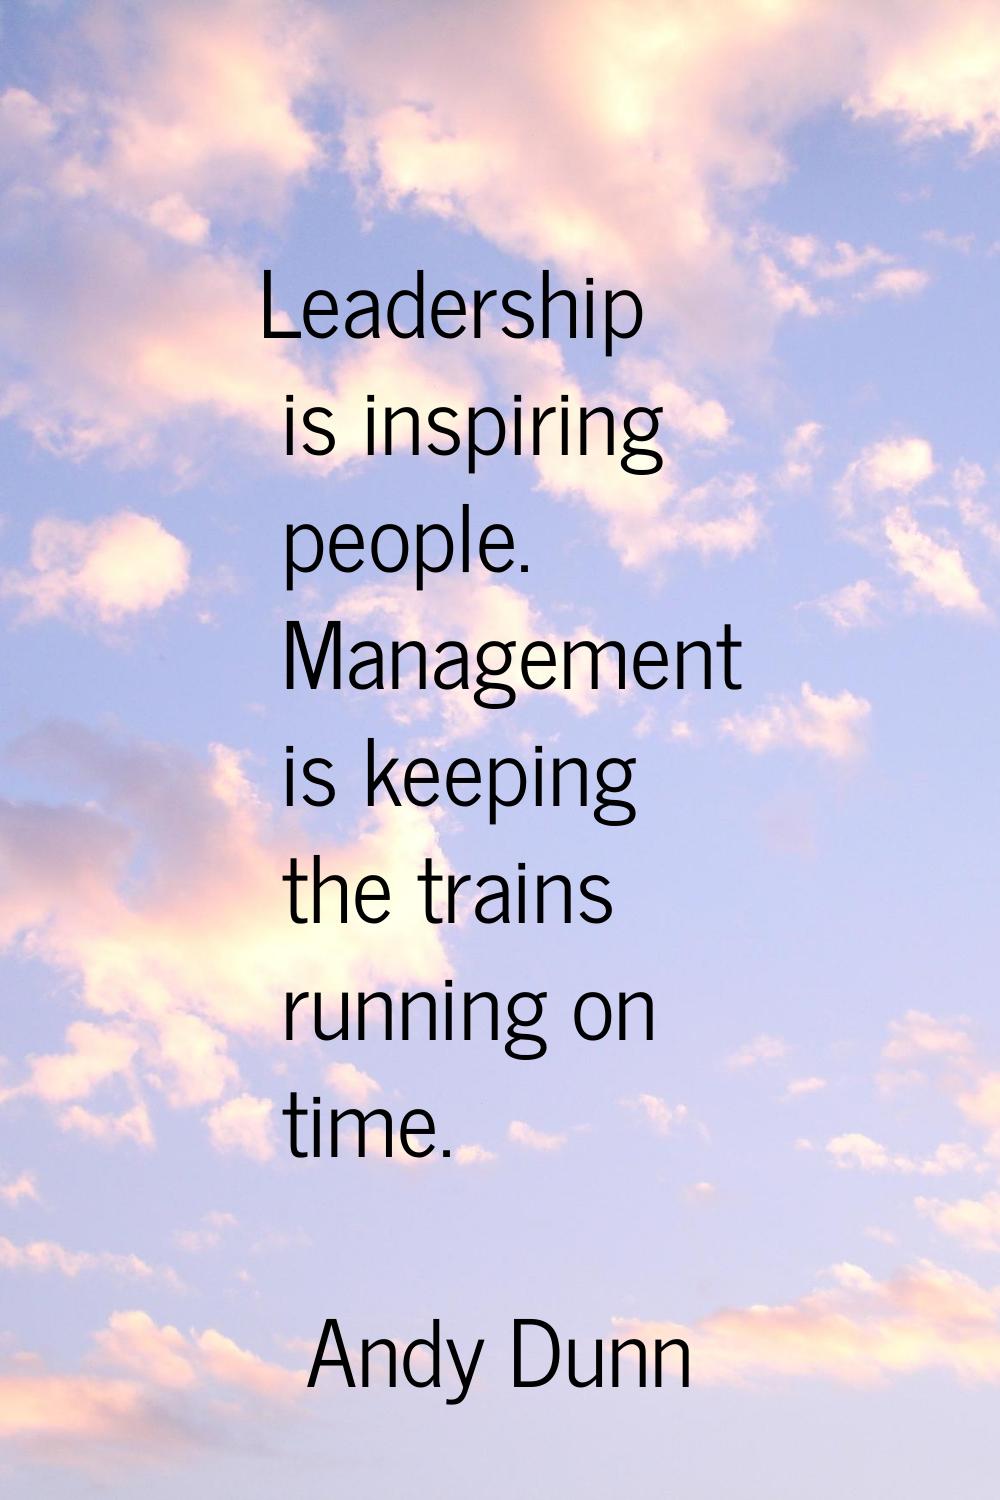 Leadership is inspiring people. Management is keeping the trains running on time.